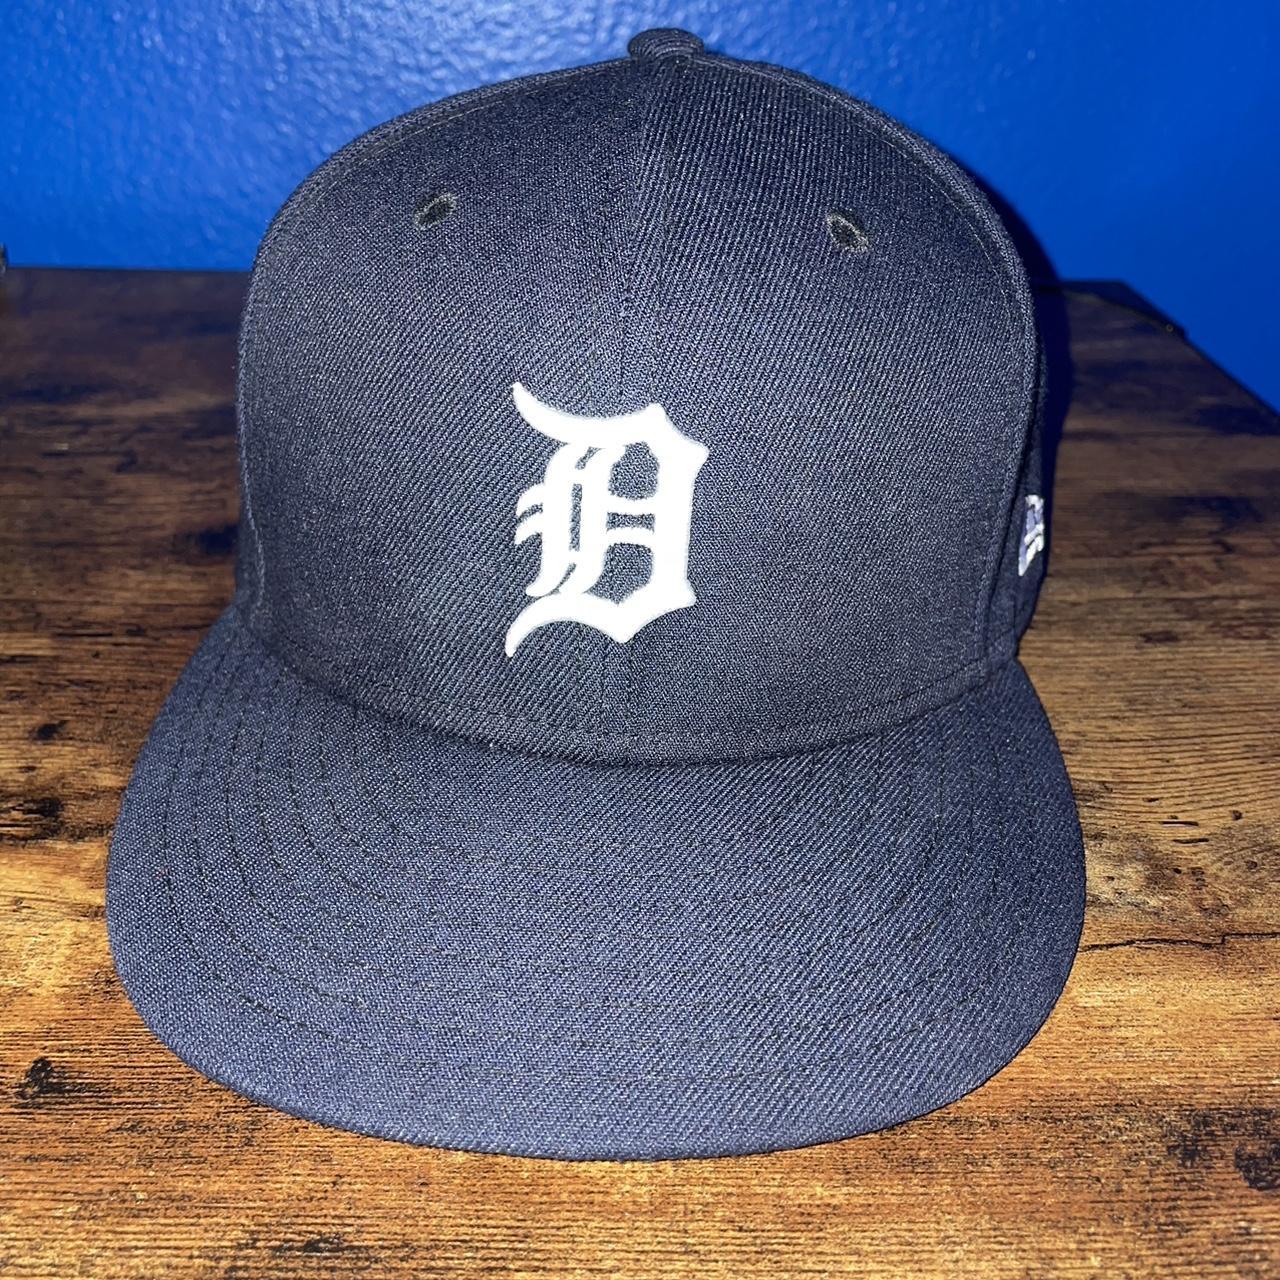 Men's Detroit Tigers New Era Navy Home Authentic Collection On